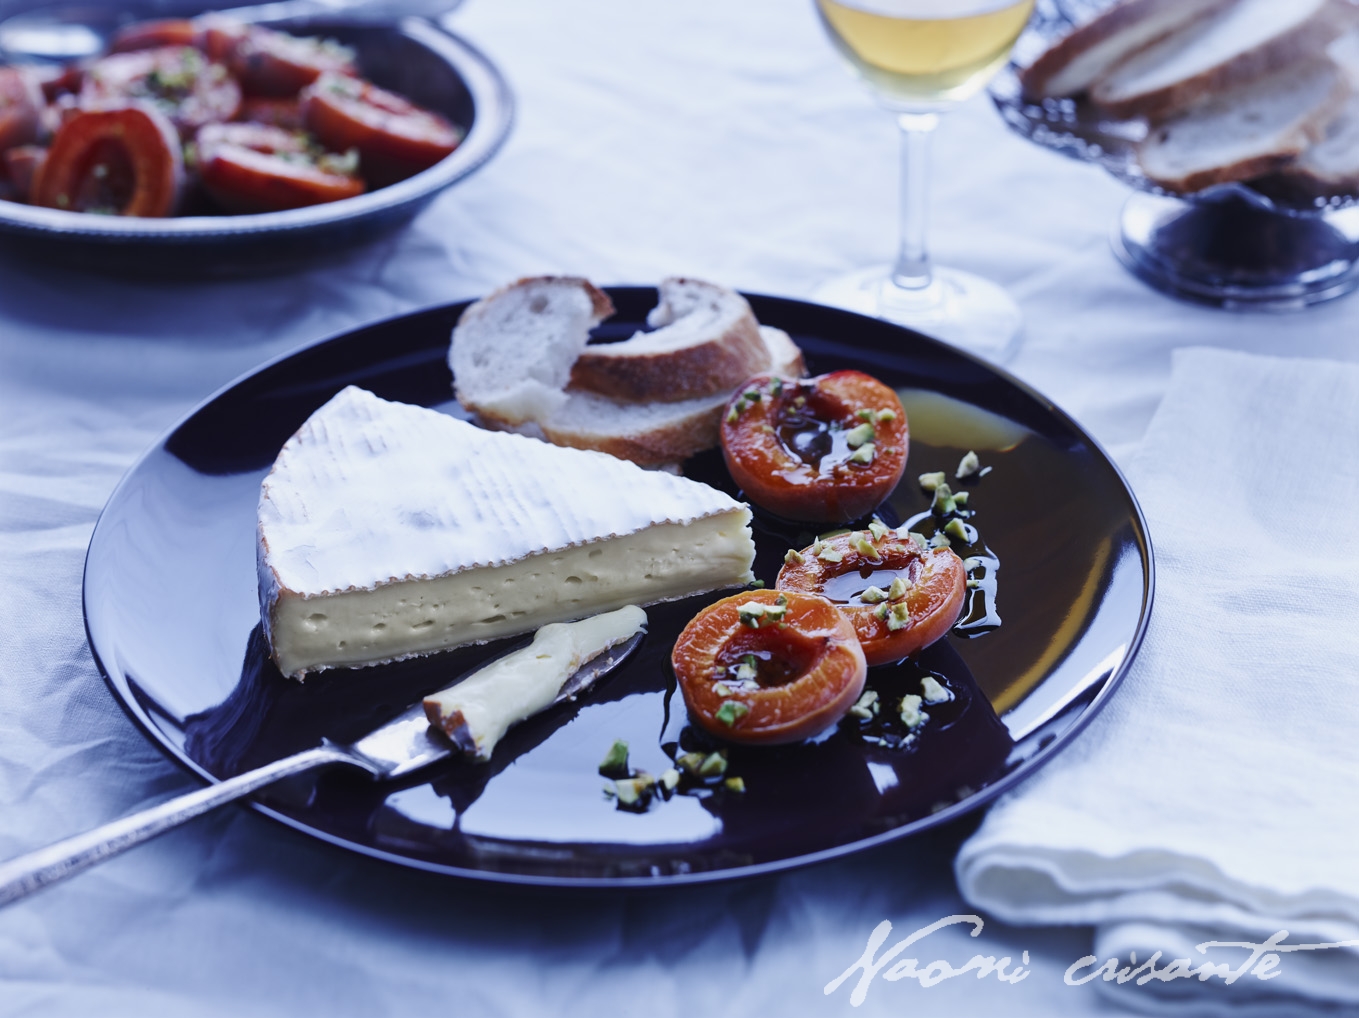 Triple Cream Brie with Roasted Pistachio Apricots